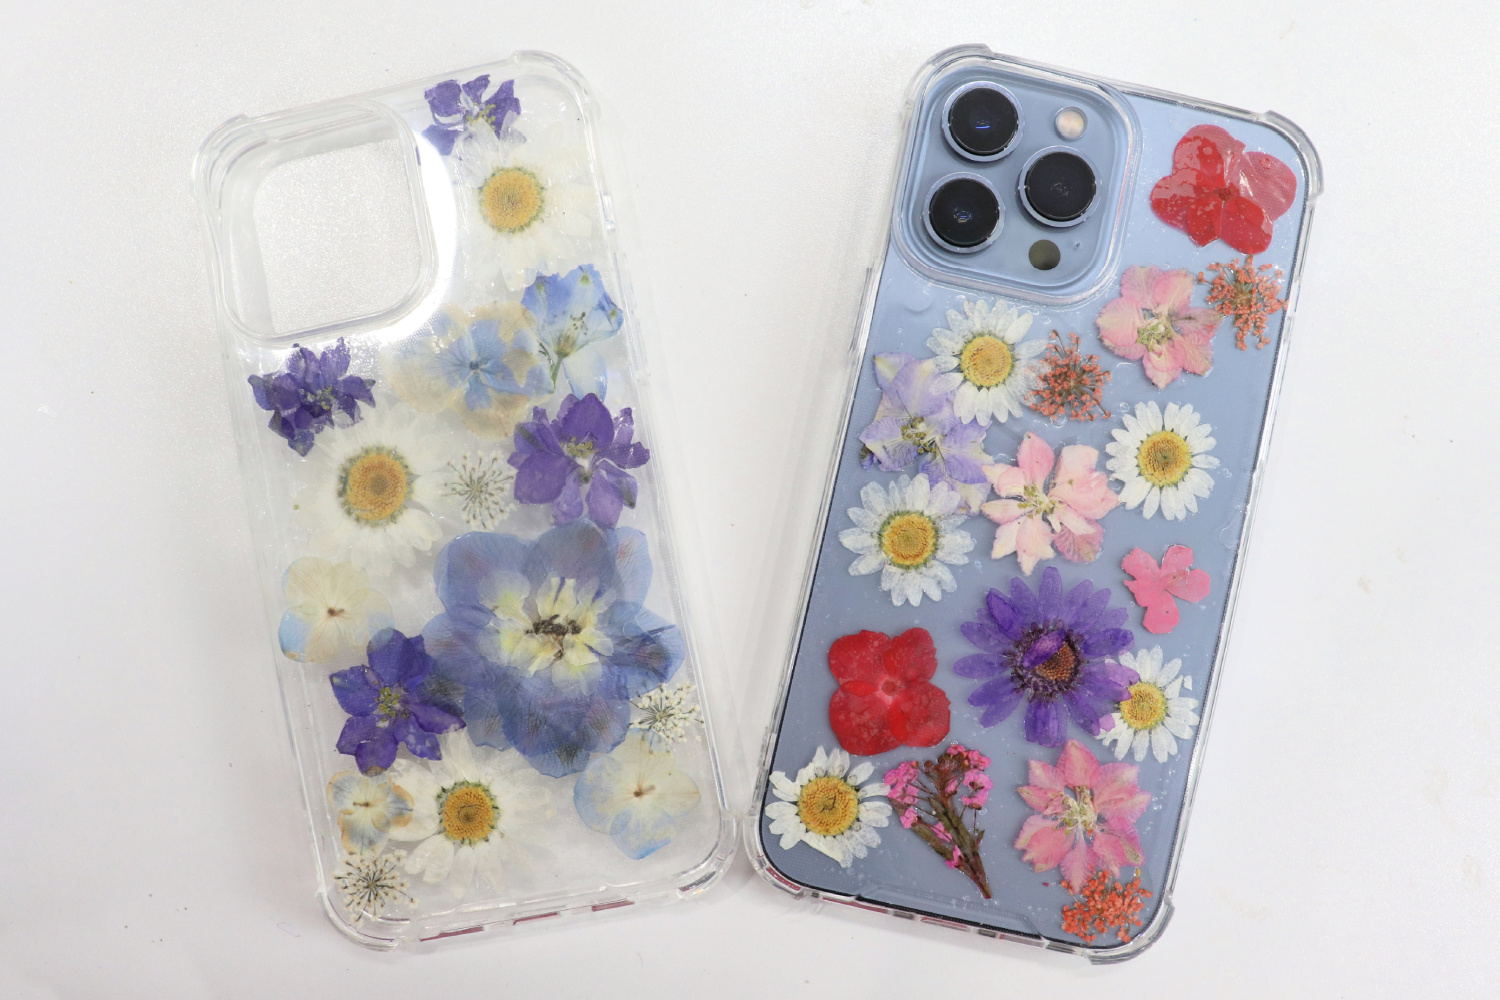 Image contains two clear phone cases decorated with pressed flowers and Tombow MONO Aqua Liquid Glue.